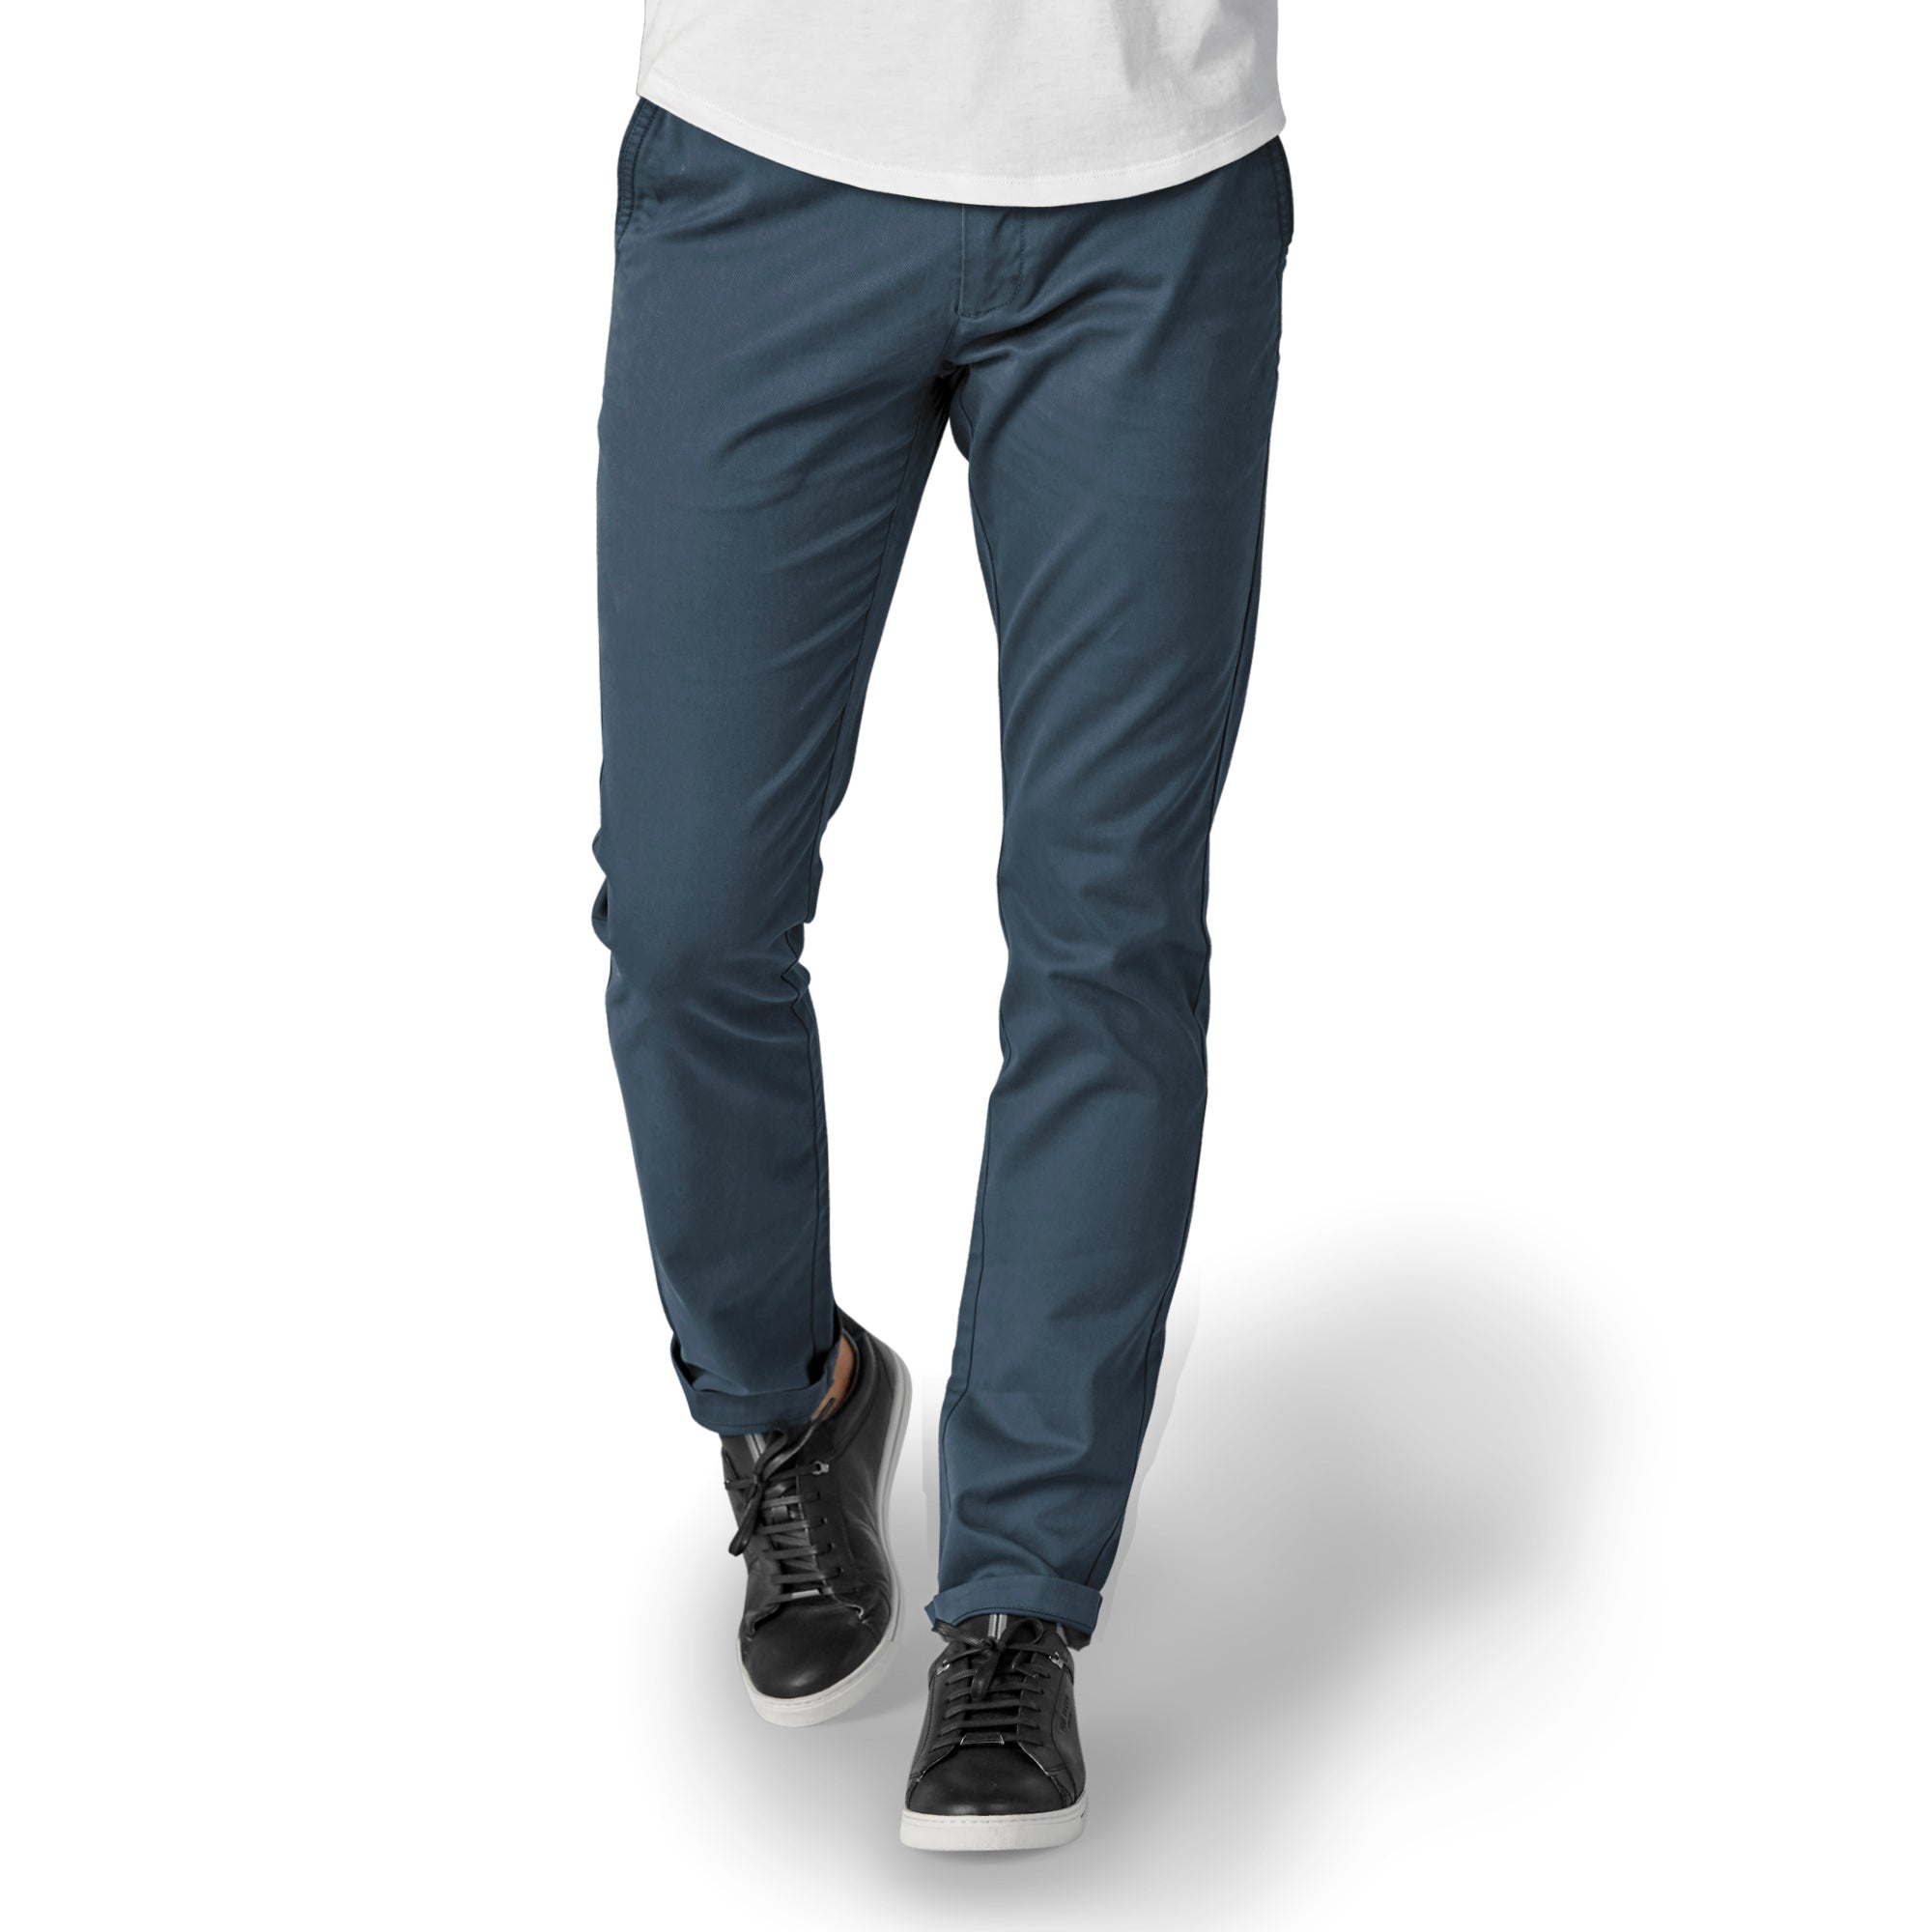 Dockers Ultimate Chino With Smart 360 Flex Mens Slim Fit Flat Front Pant -  JCPenney